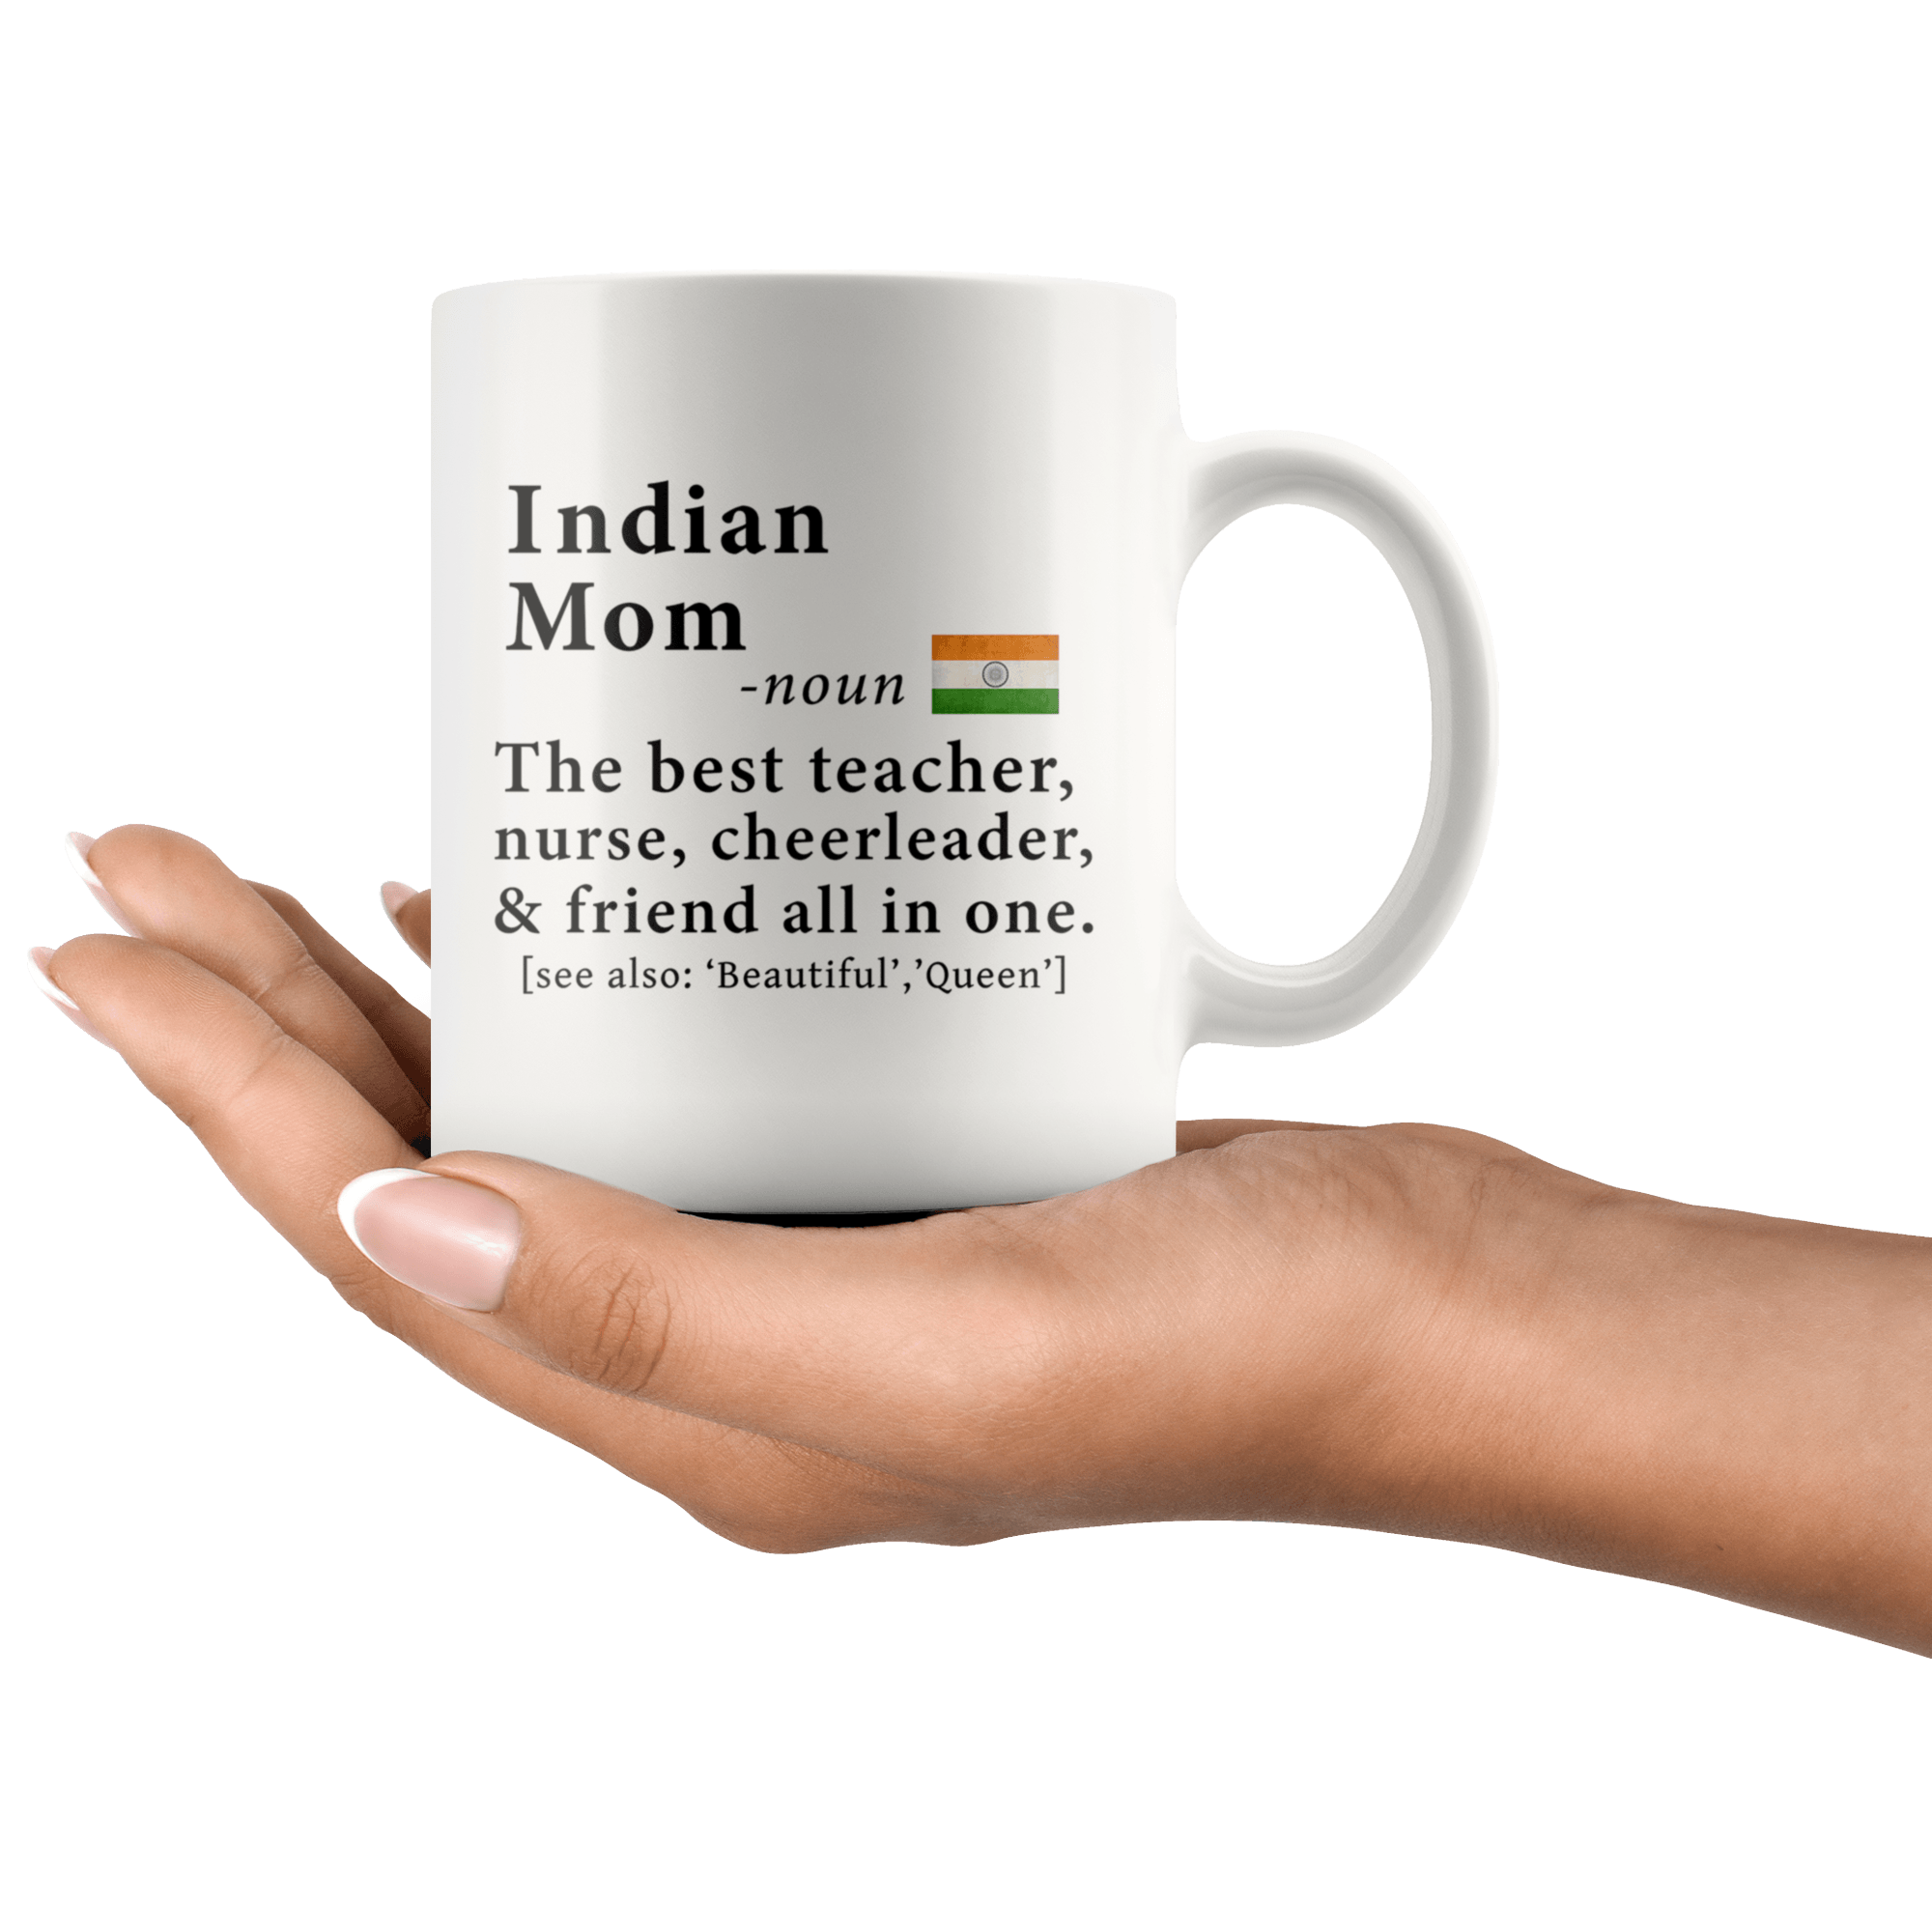 Make 10th May The Happiest Mother's Day For Her